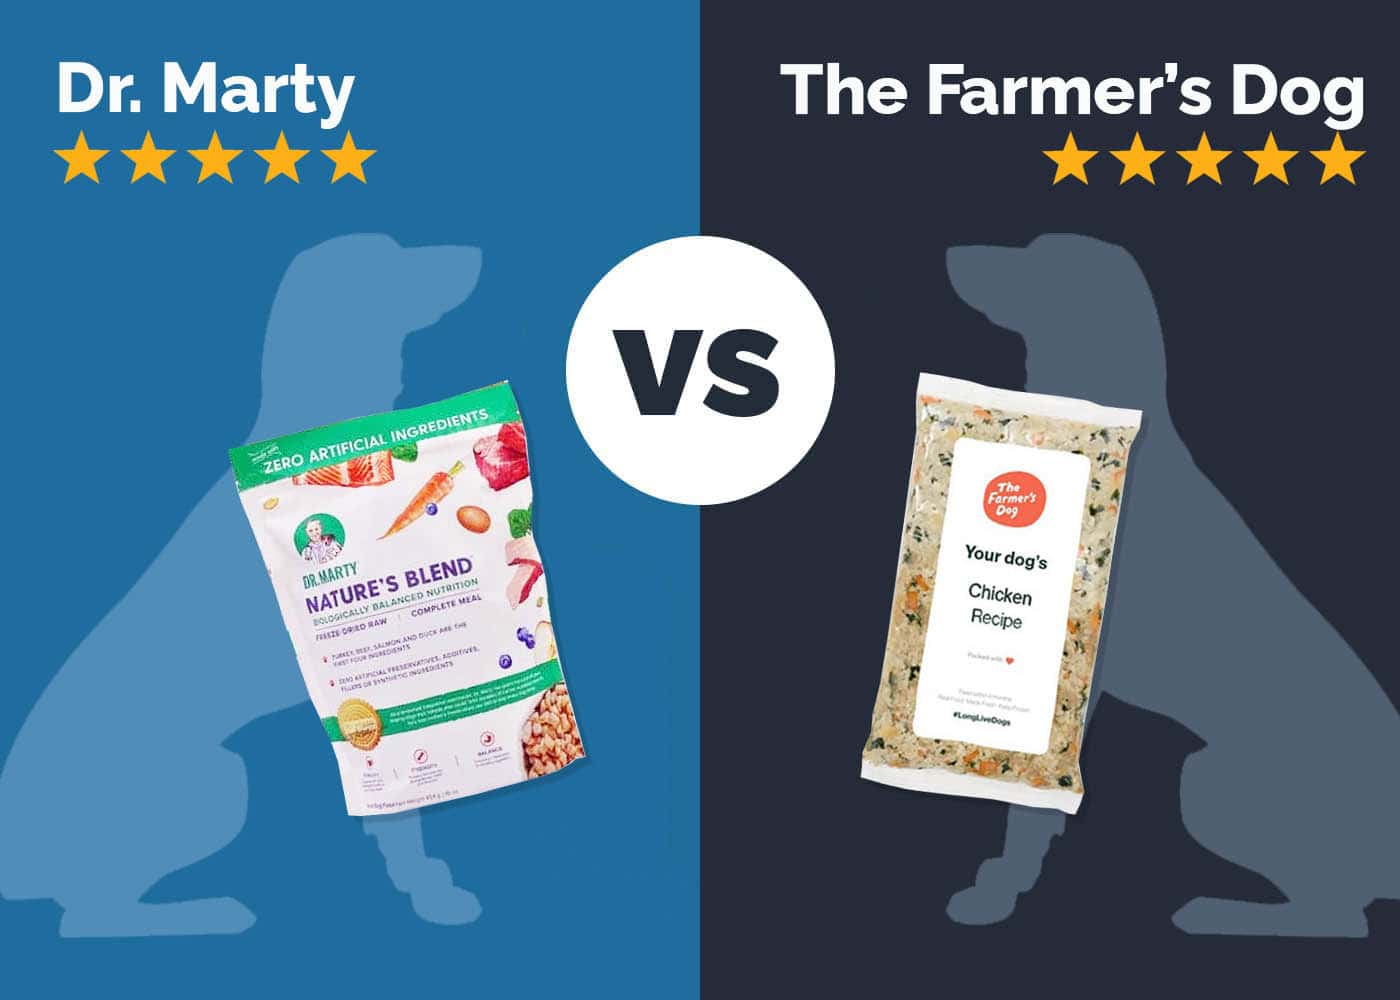 Dr Martys vs The Farmers Dog